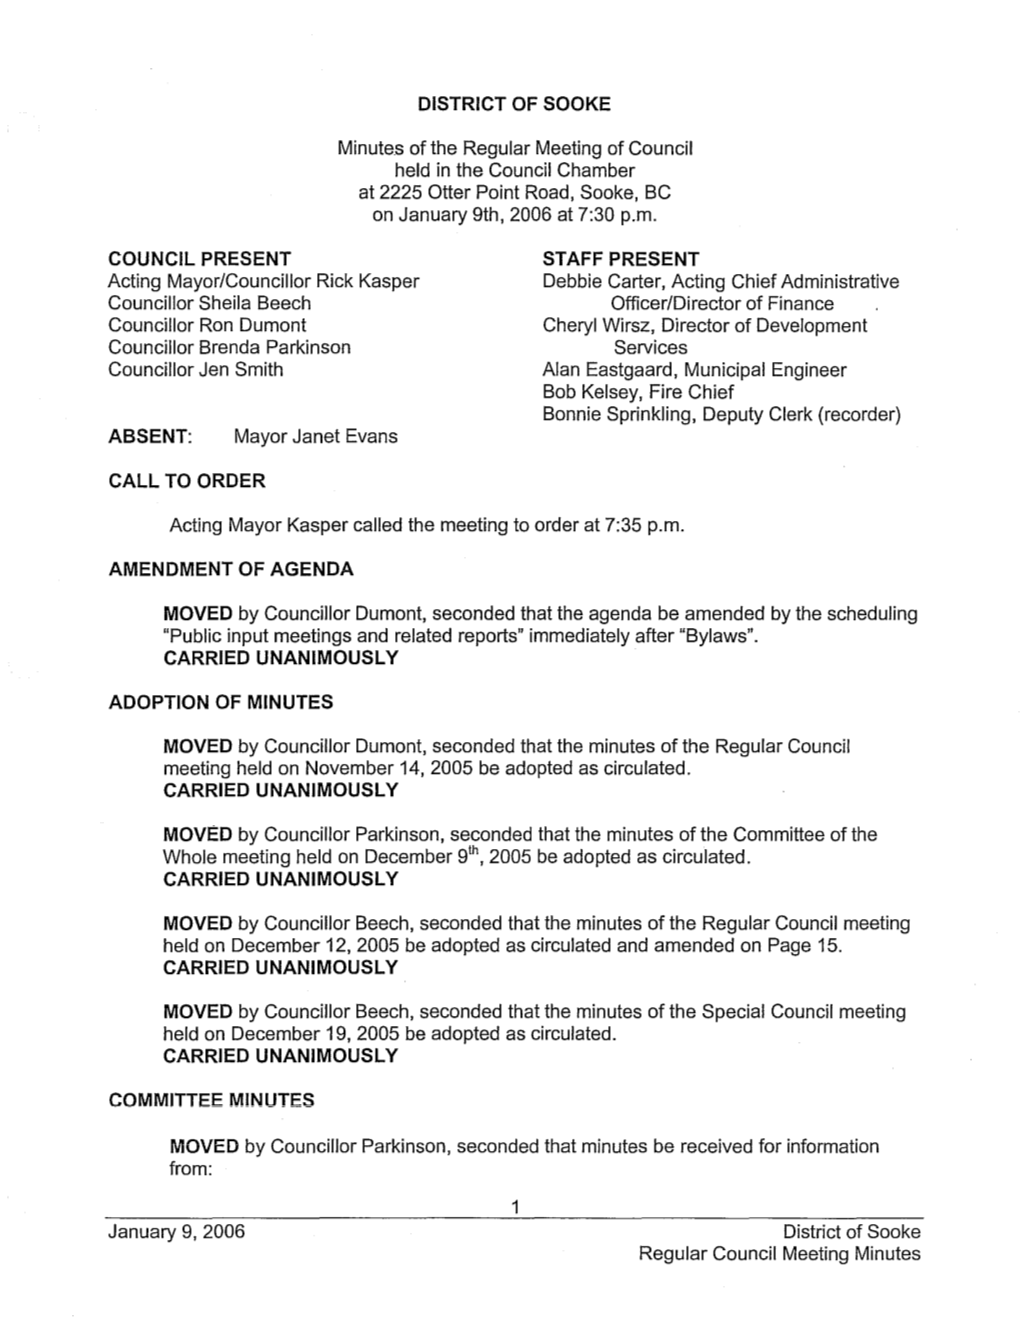 DISTRICT of SOOKE Minutes of the Regular Meeting of Council Held In